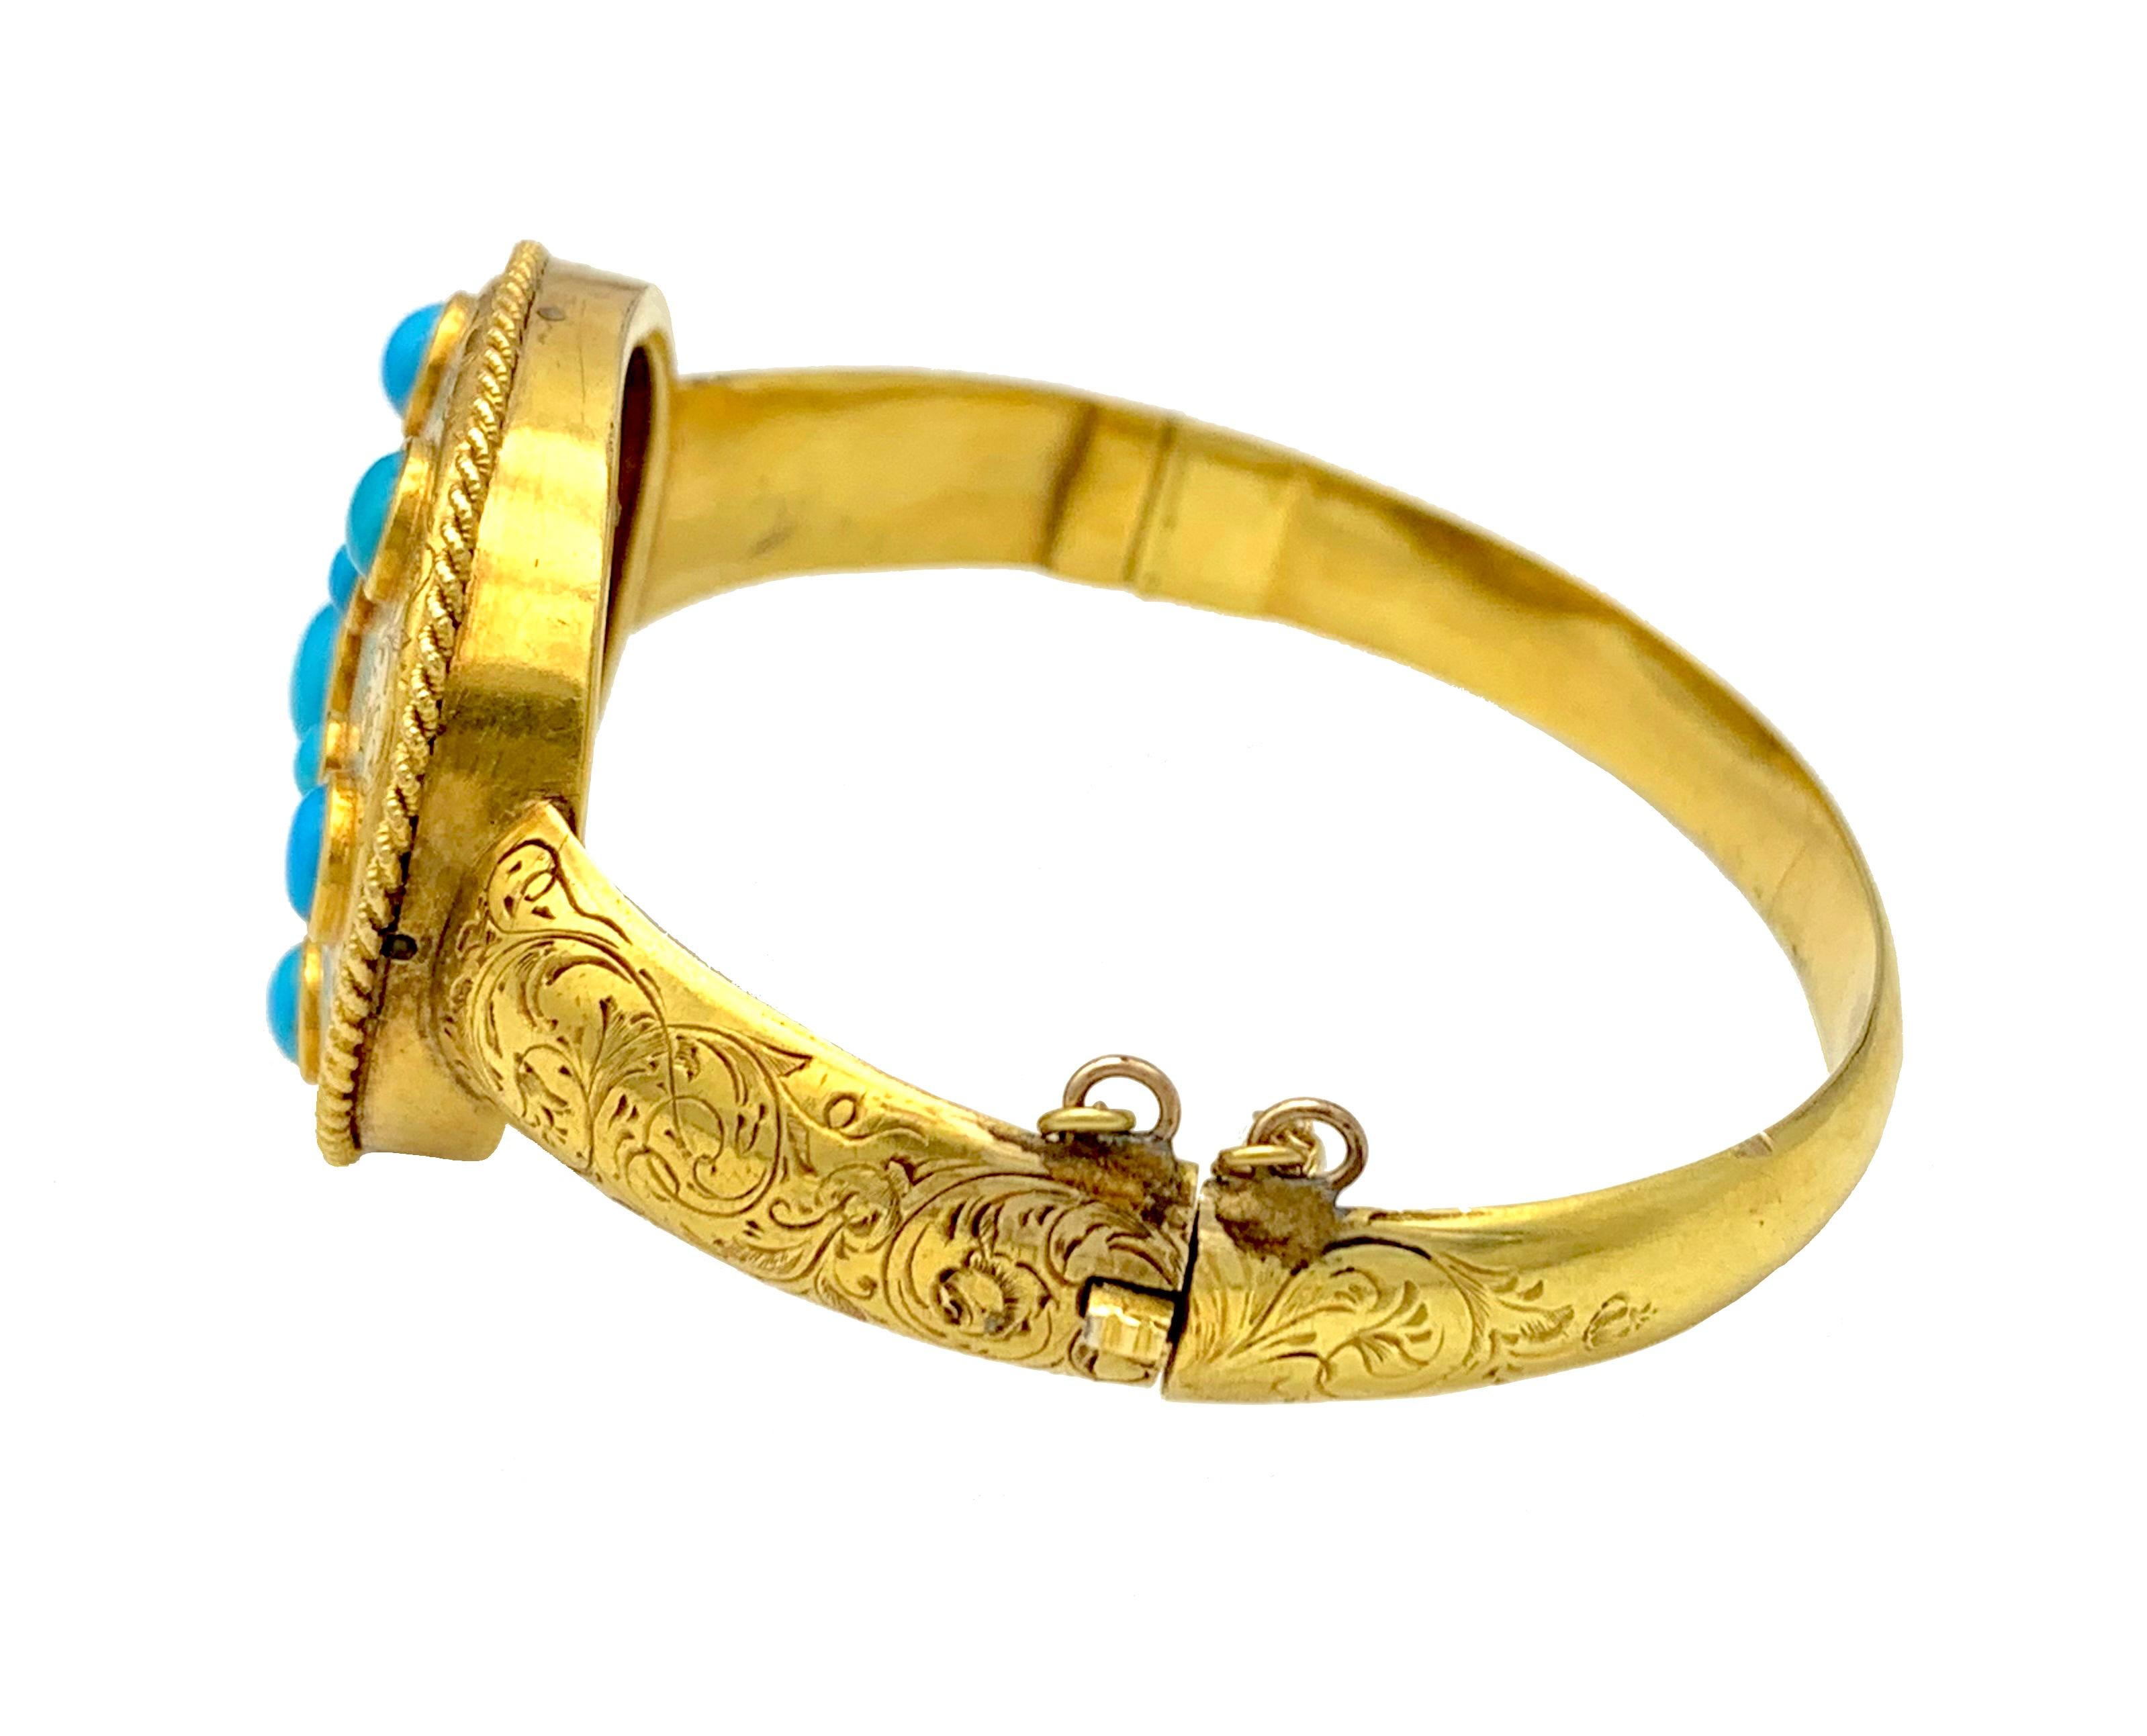 This exquisite gold bangle features as a star made out of fine turquoise cabochon within an oval surround framed by twisted gold wire. The bangle is decorated with fine hand engraving. The jewel was made in 1845 ca and has survived nearly 180 years